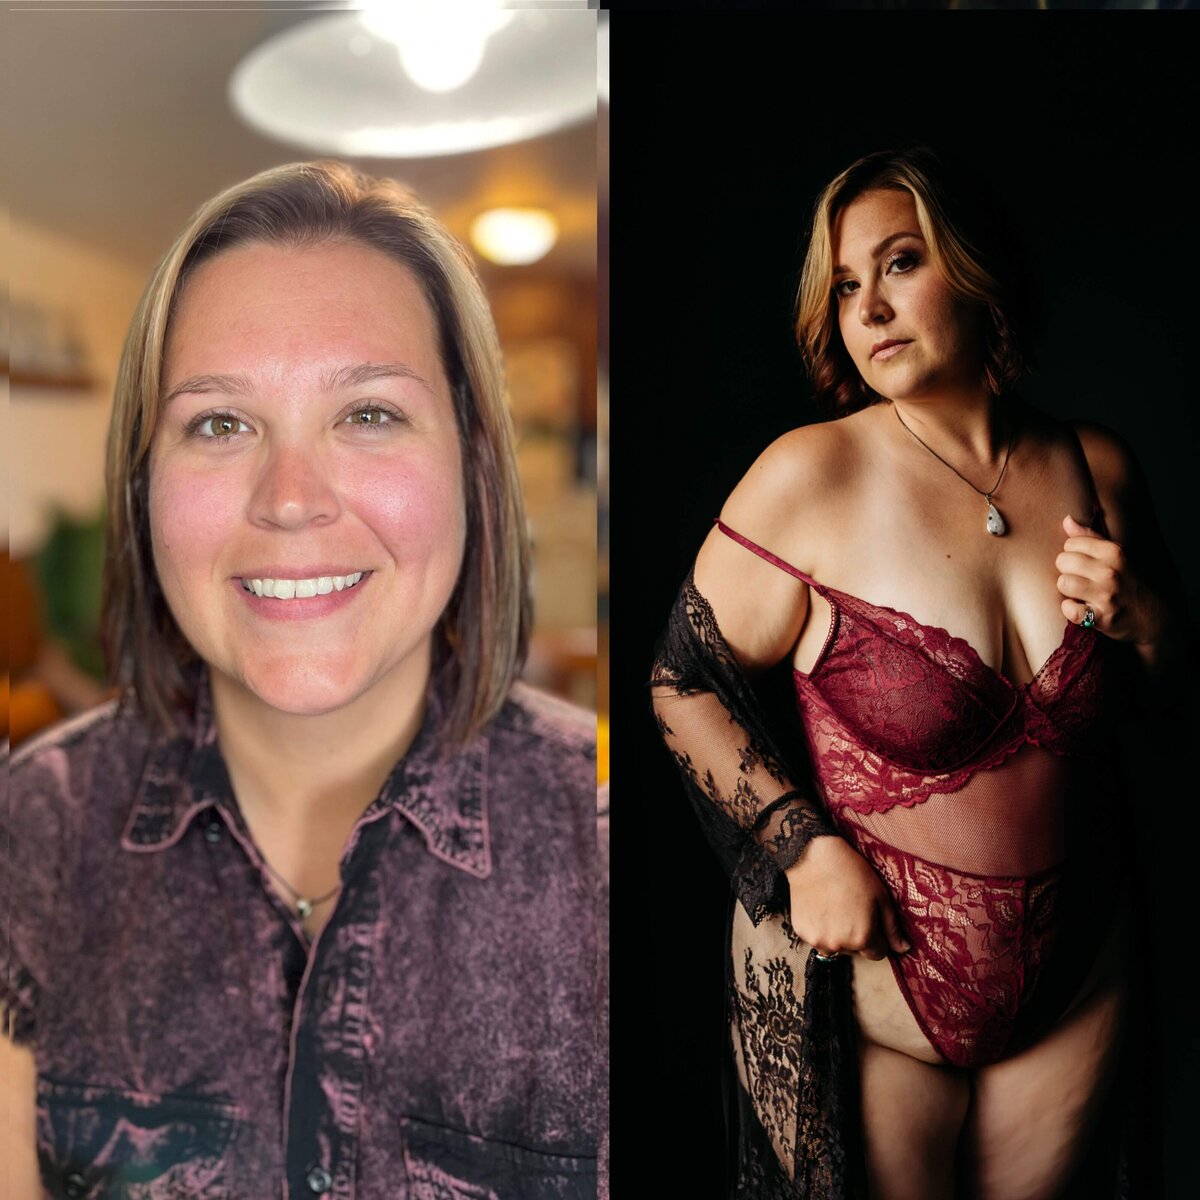 photo of 2 images of a woman and how she looked before and during her session